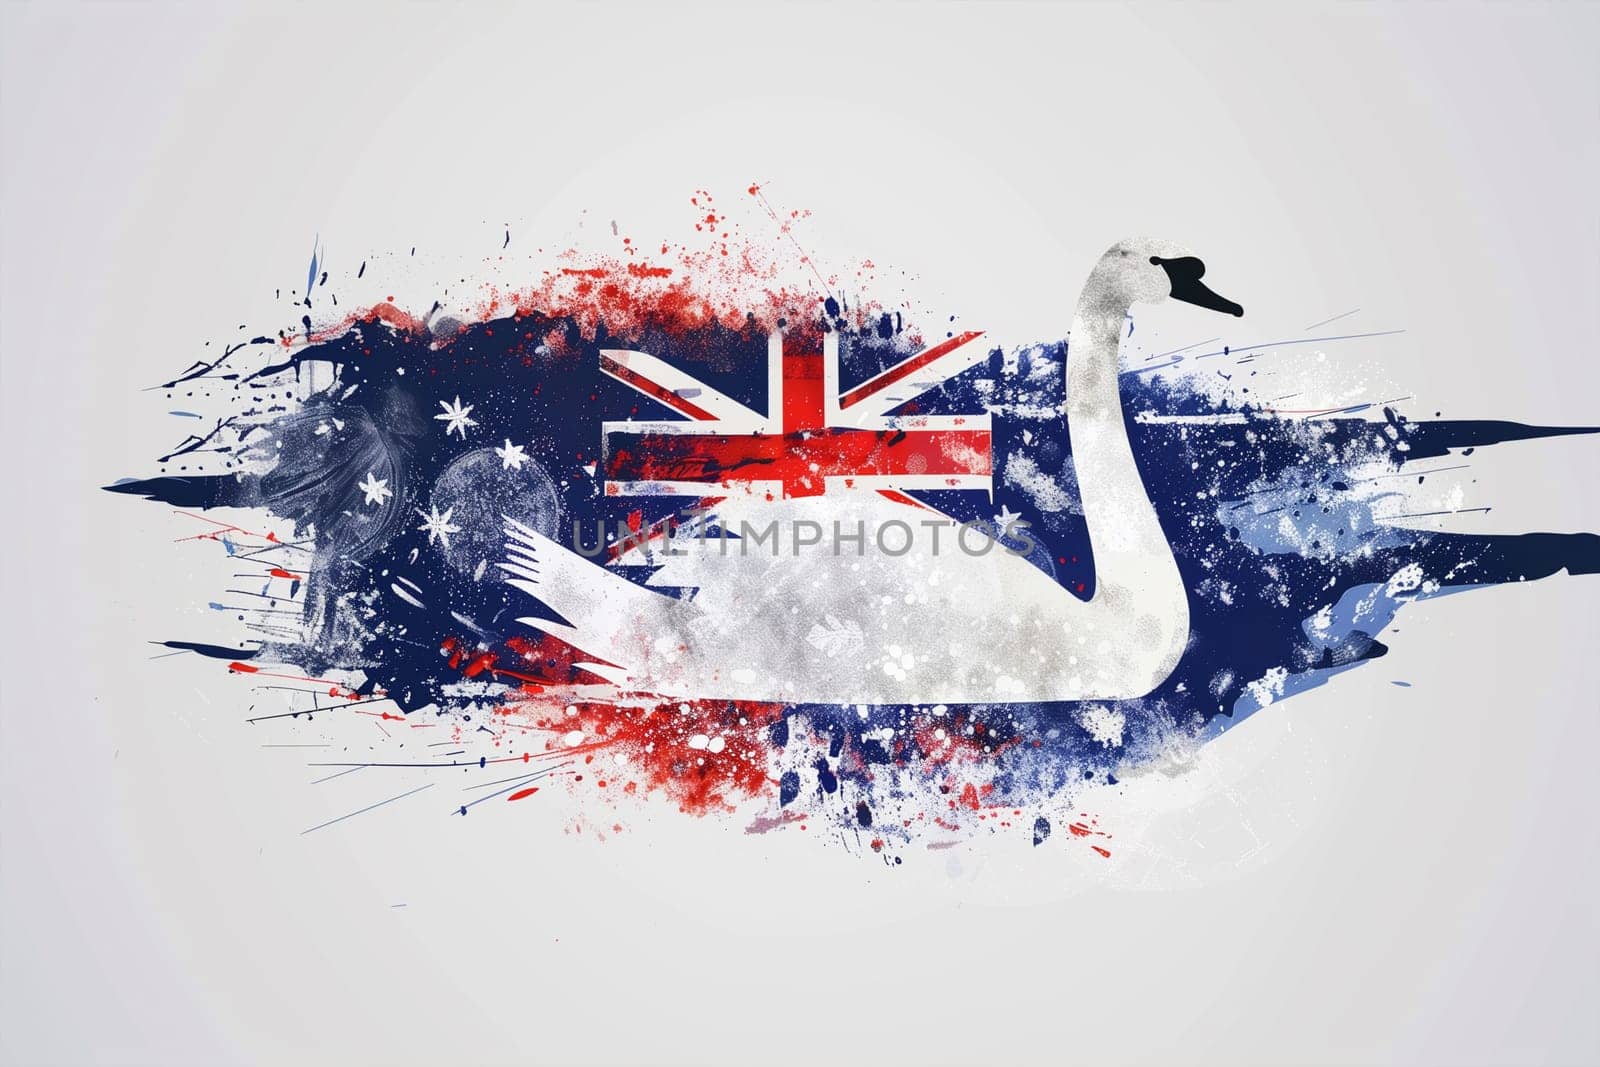 A swan proudly displaying the Australian flag painted on its feathers.